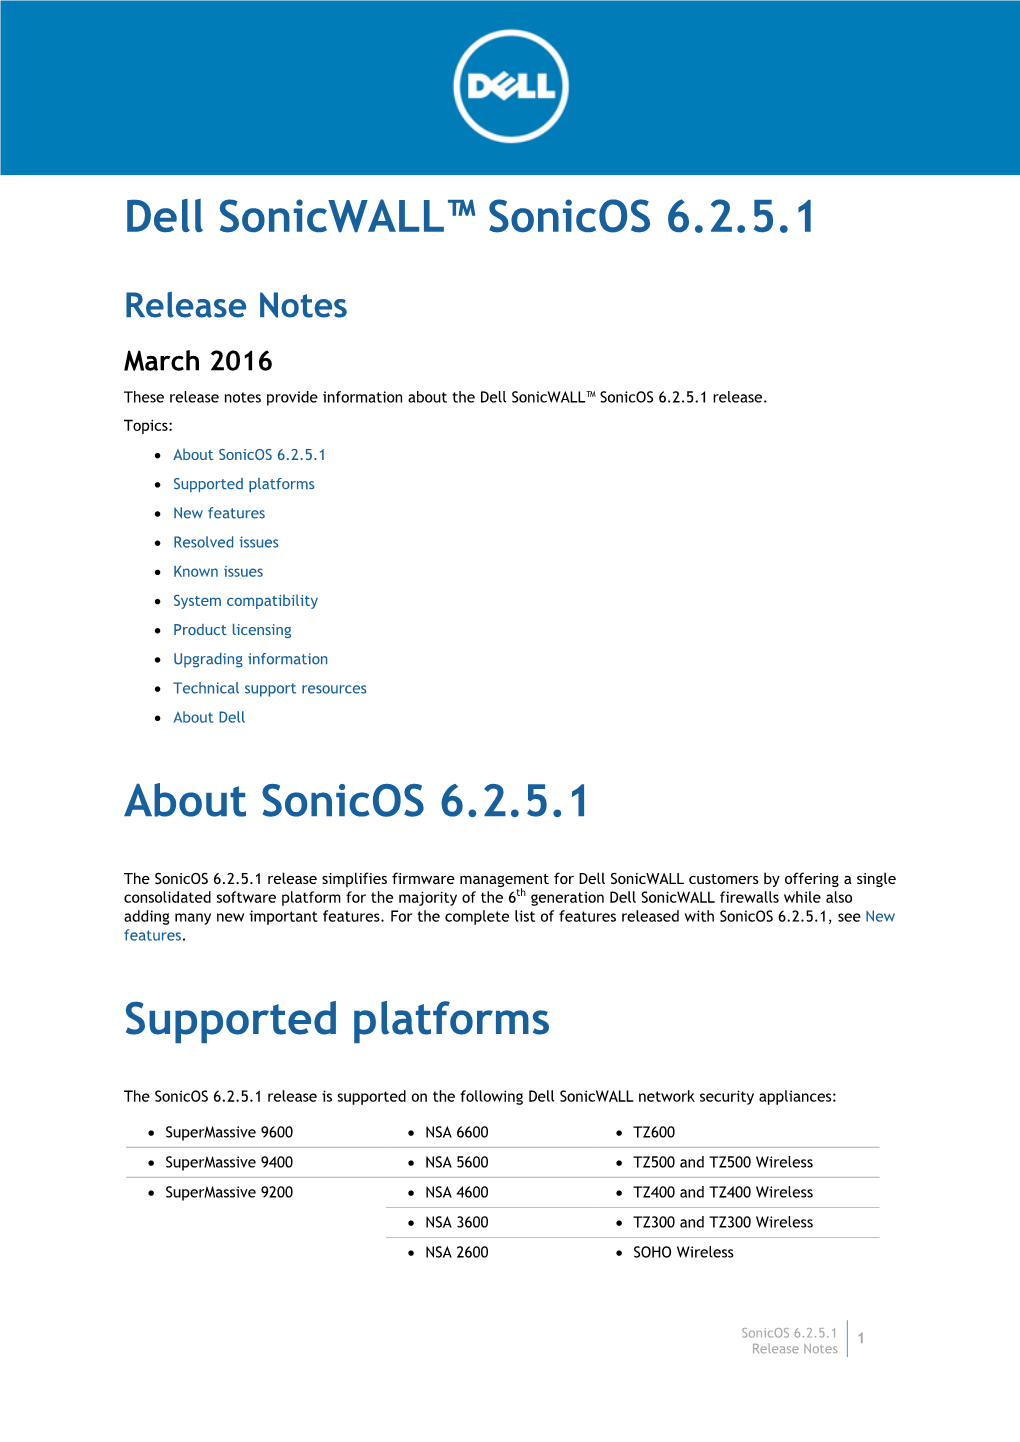 Dell Sonicwall Sonicos 6.2.5.1 Release Notes